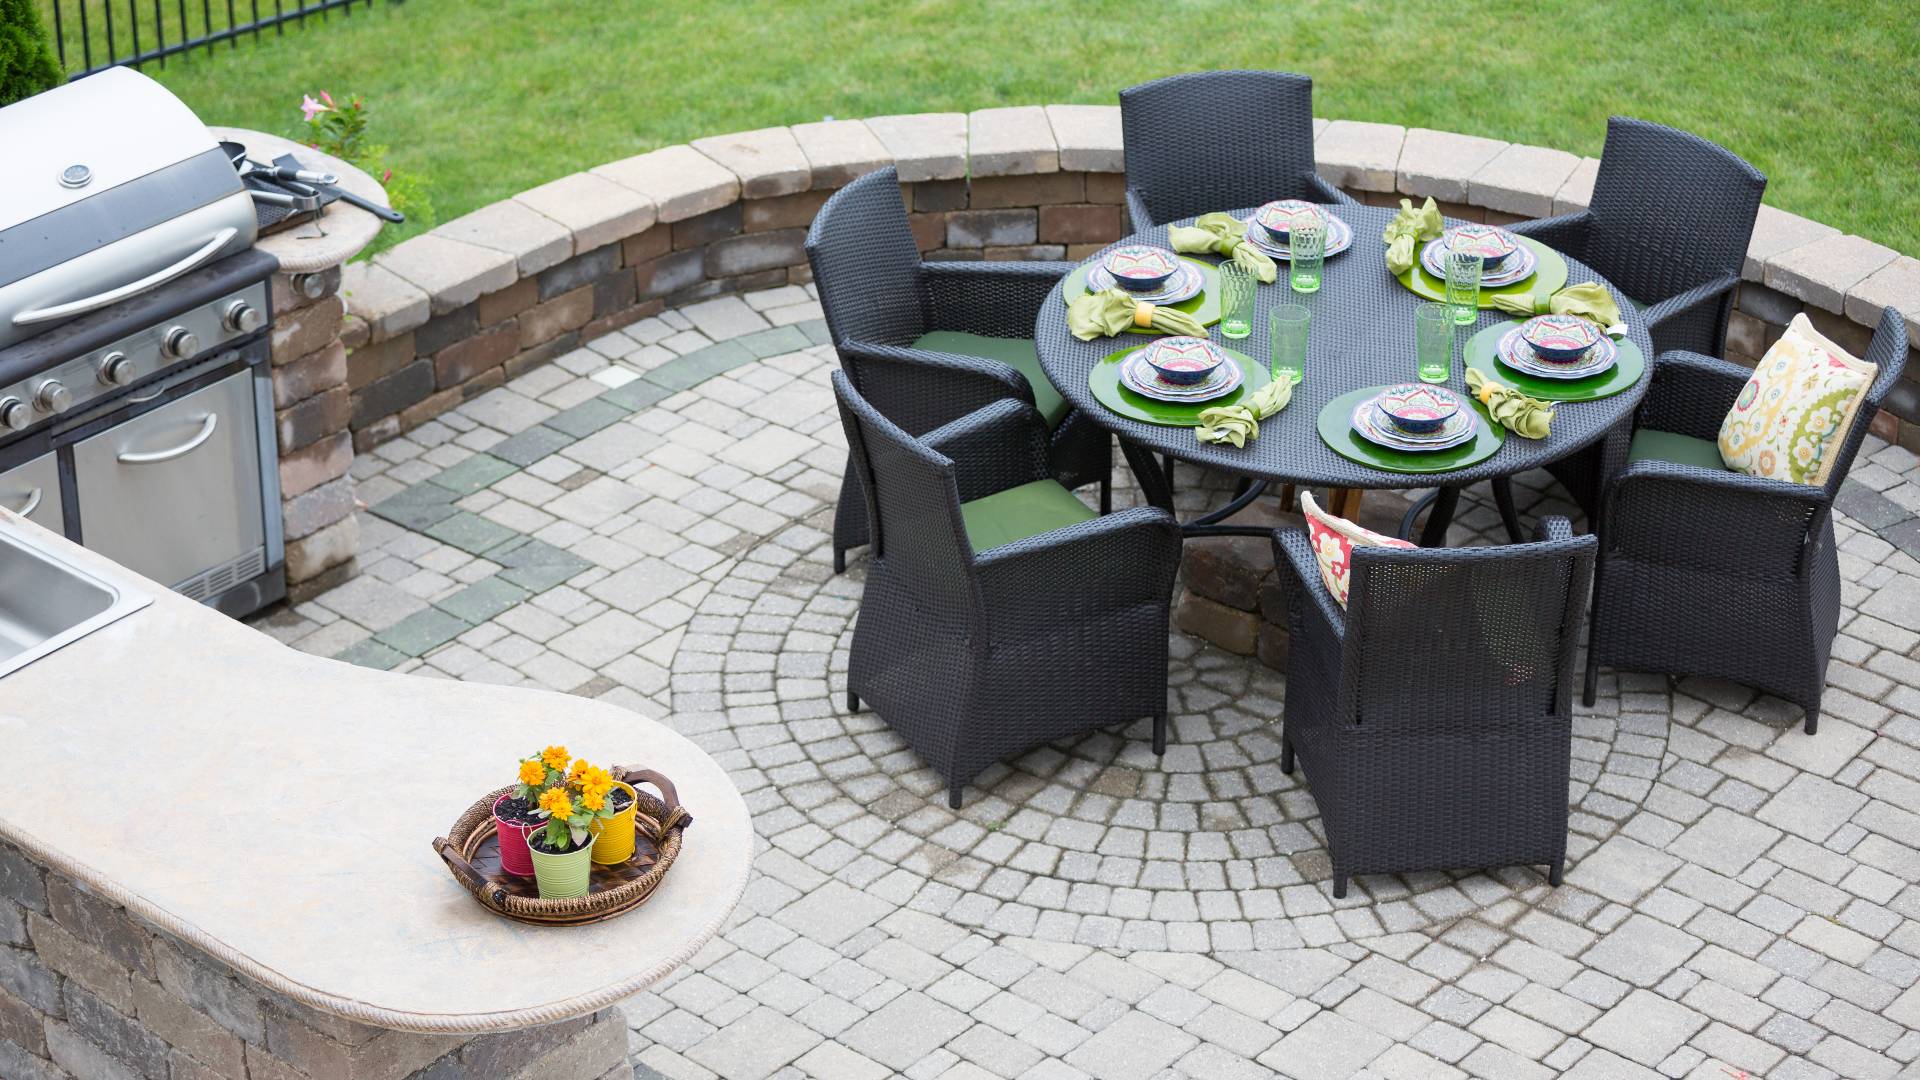 Take Your Patio to the Next Level With These 3 Upgrades